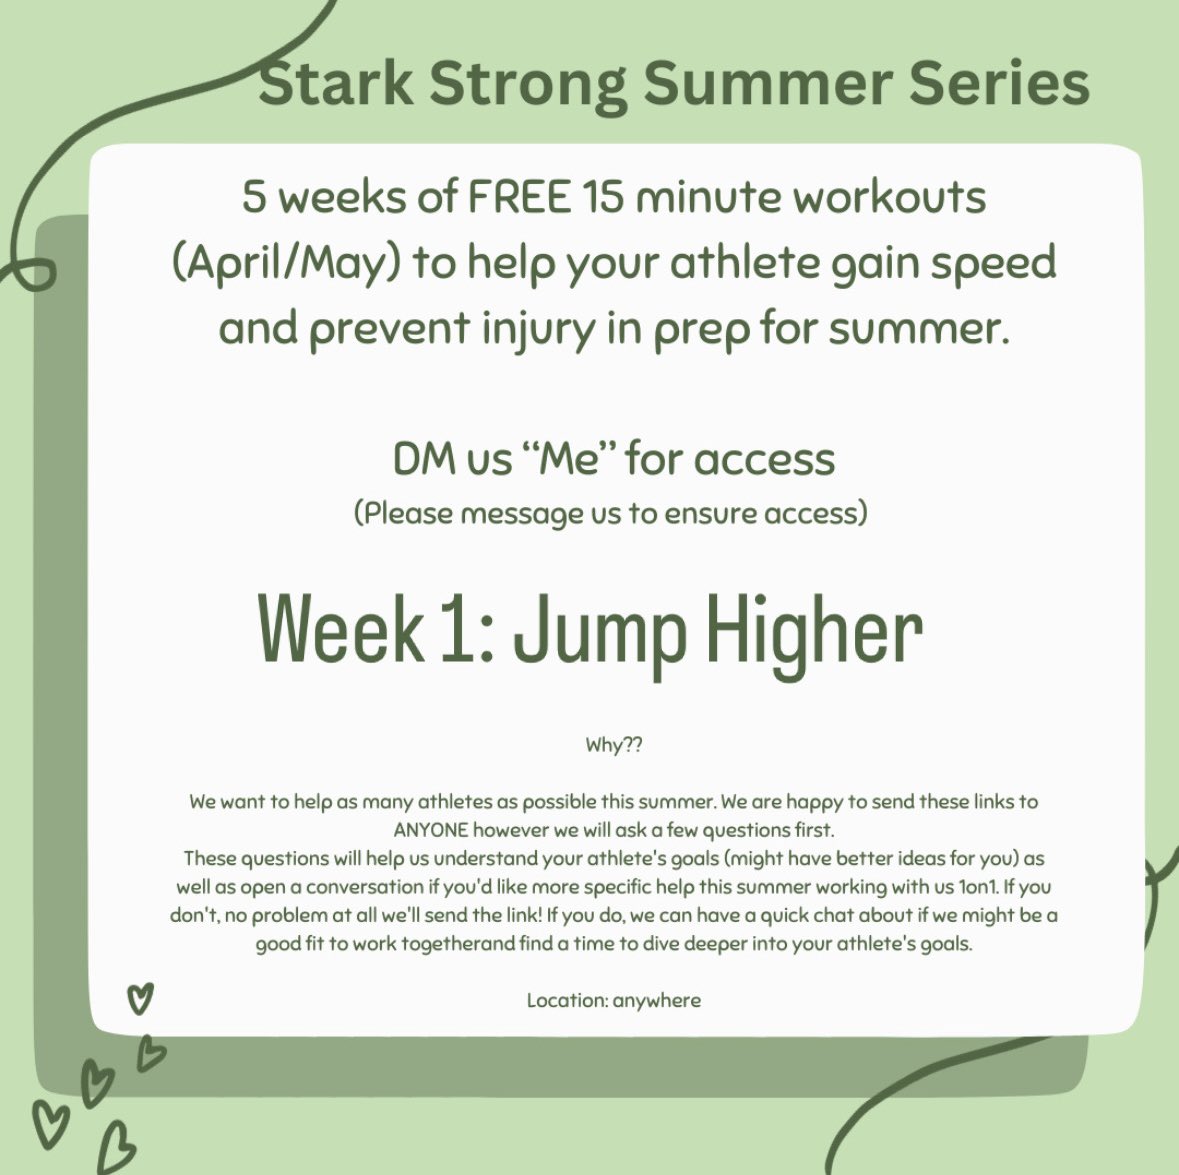 Free Speed Drills! Week 1: Jump Higher Details in picture. We also offer a FREE Gap program to any athlete committed to join our 12 or 8 week Mentorship early. This gives your athlete full access to our resources and coaches PLUS more momentum